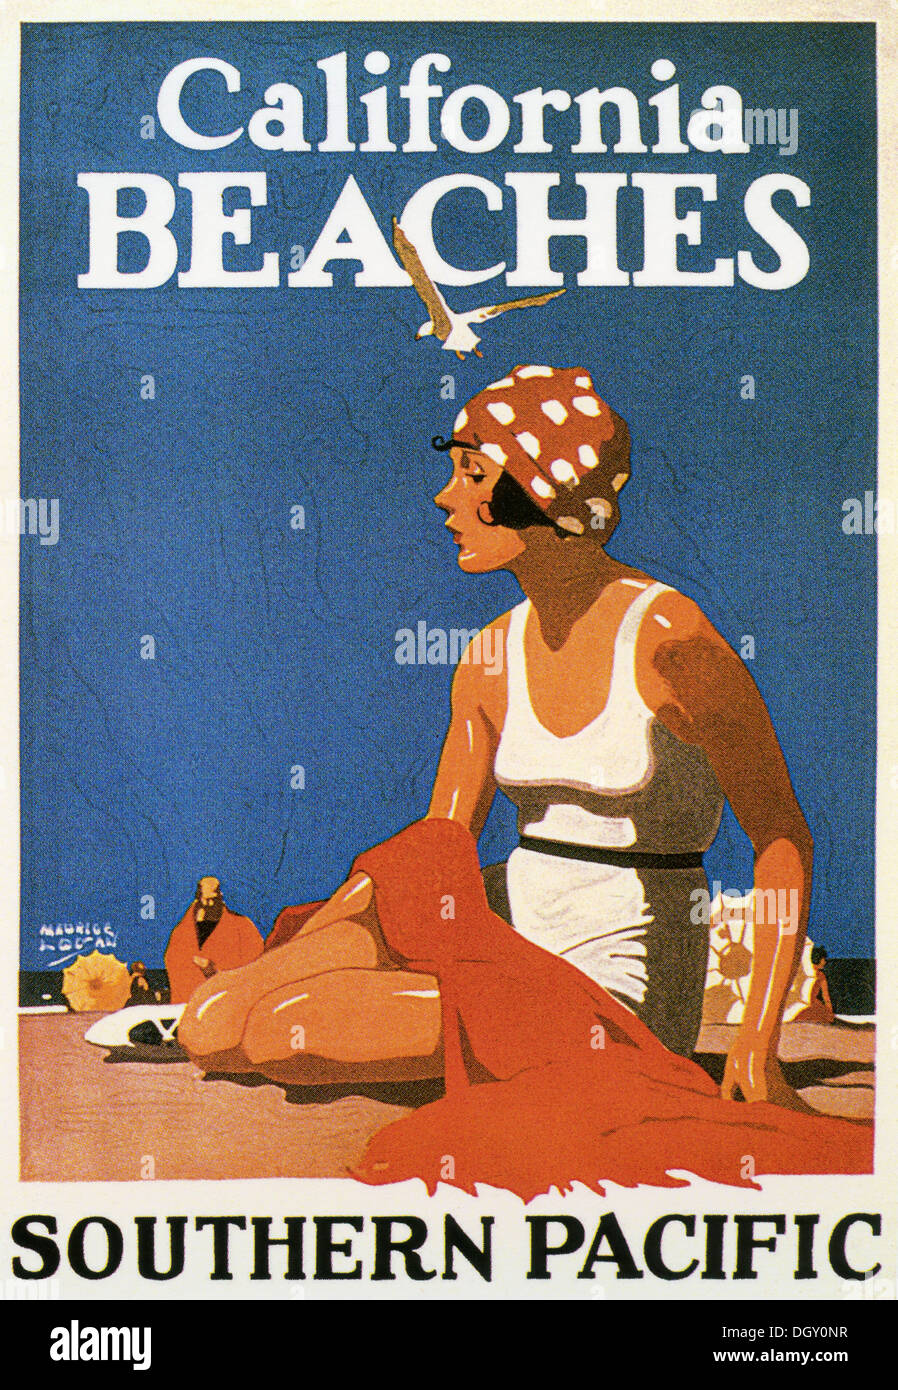 California Beaches for Southern Pacific vintage travel poster, 1923 - Editorial use only. Stock Photo